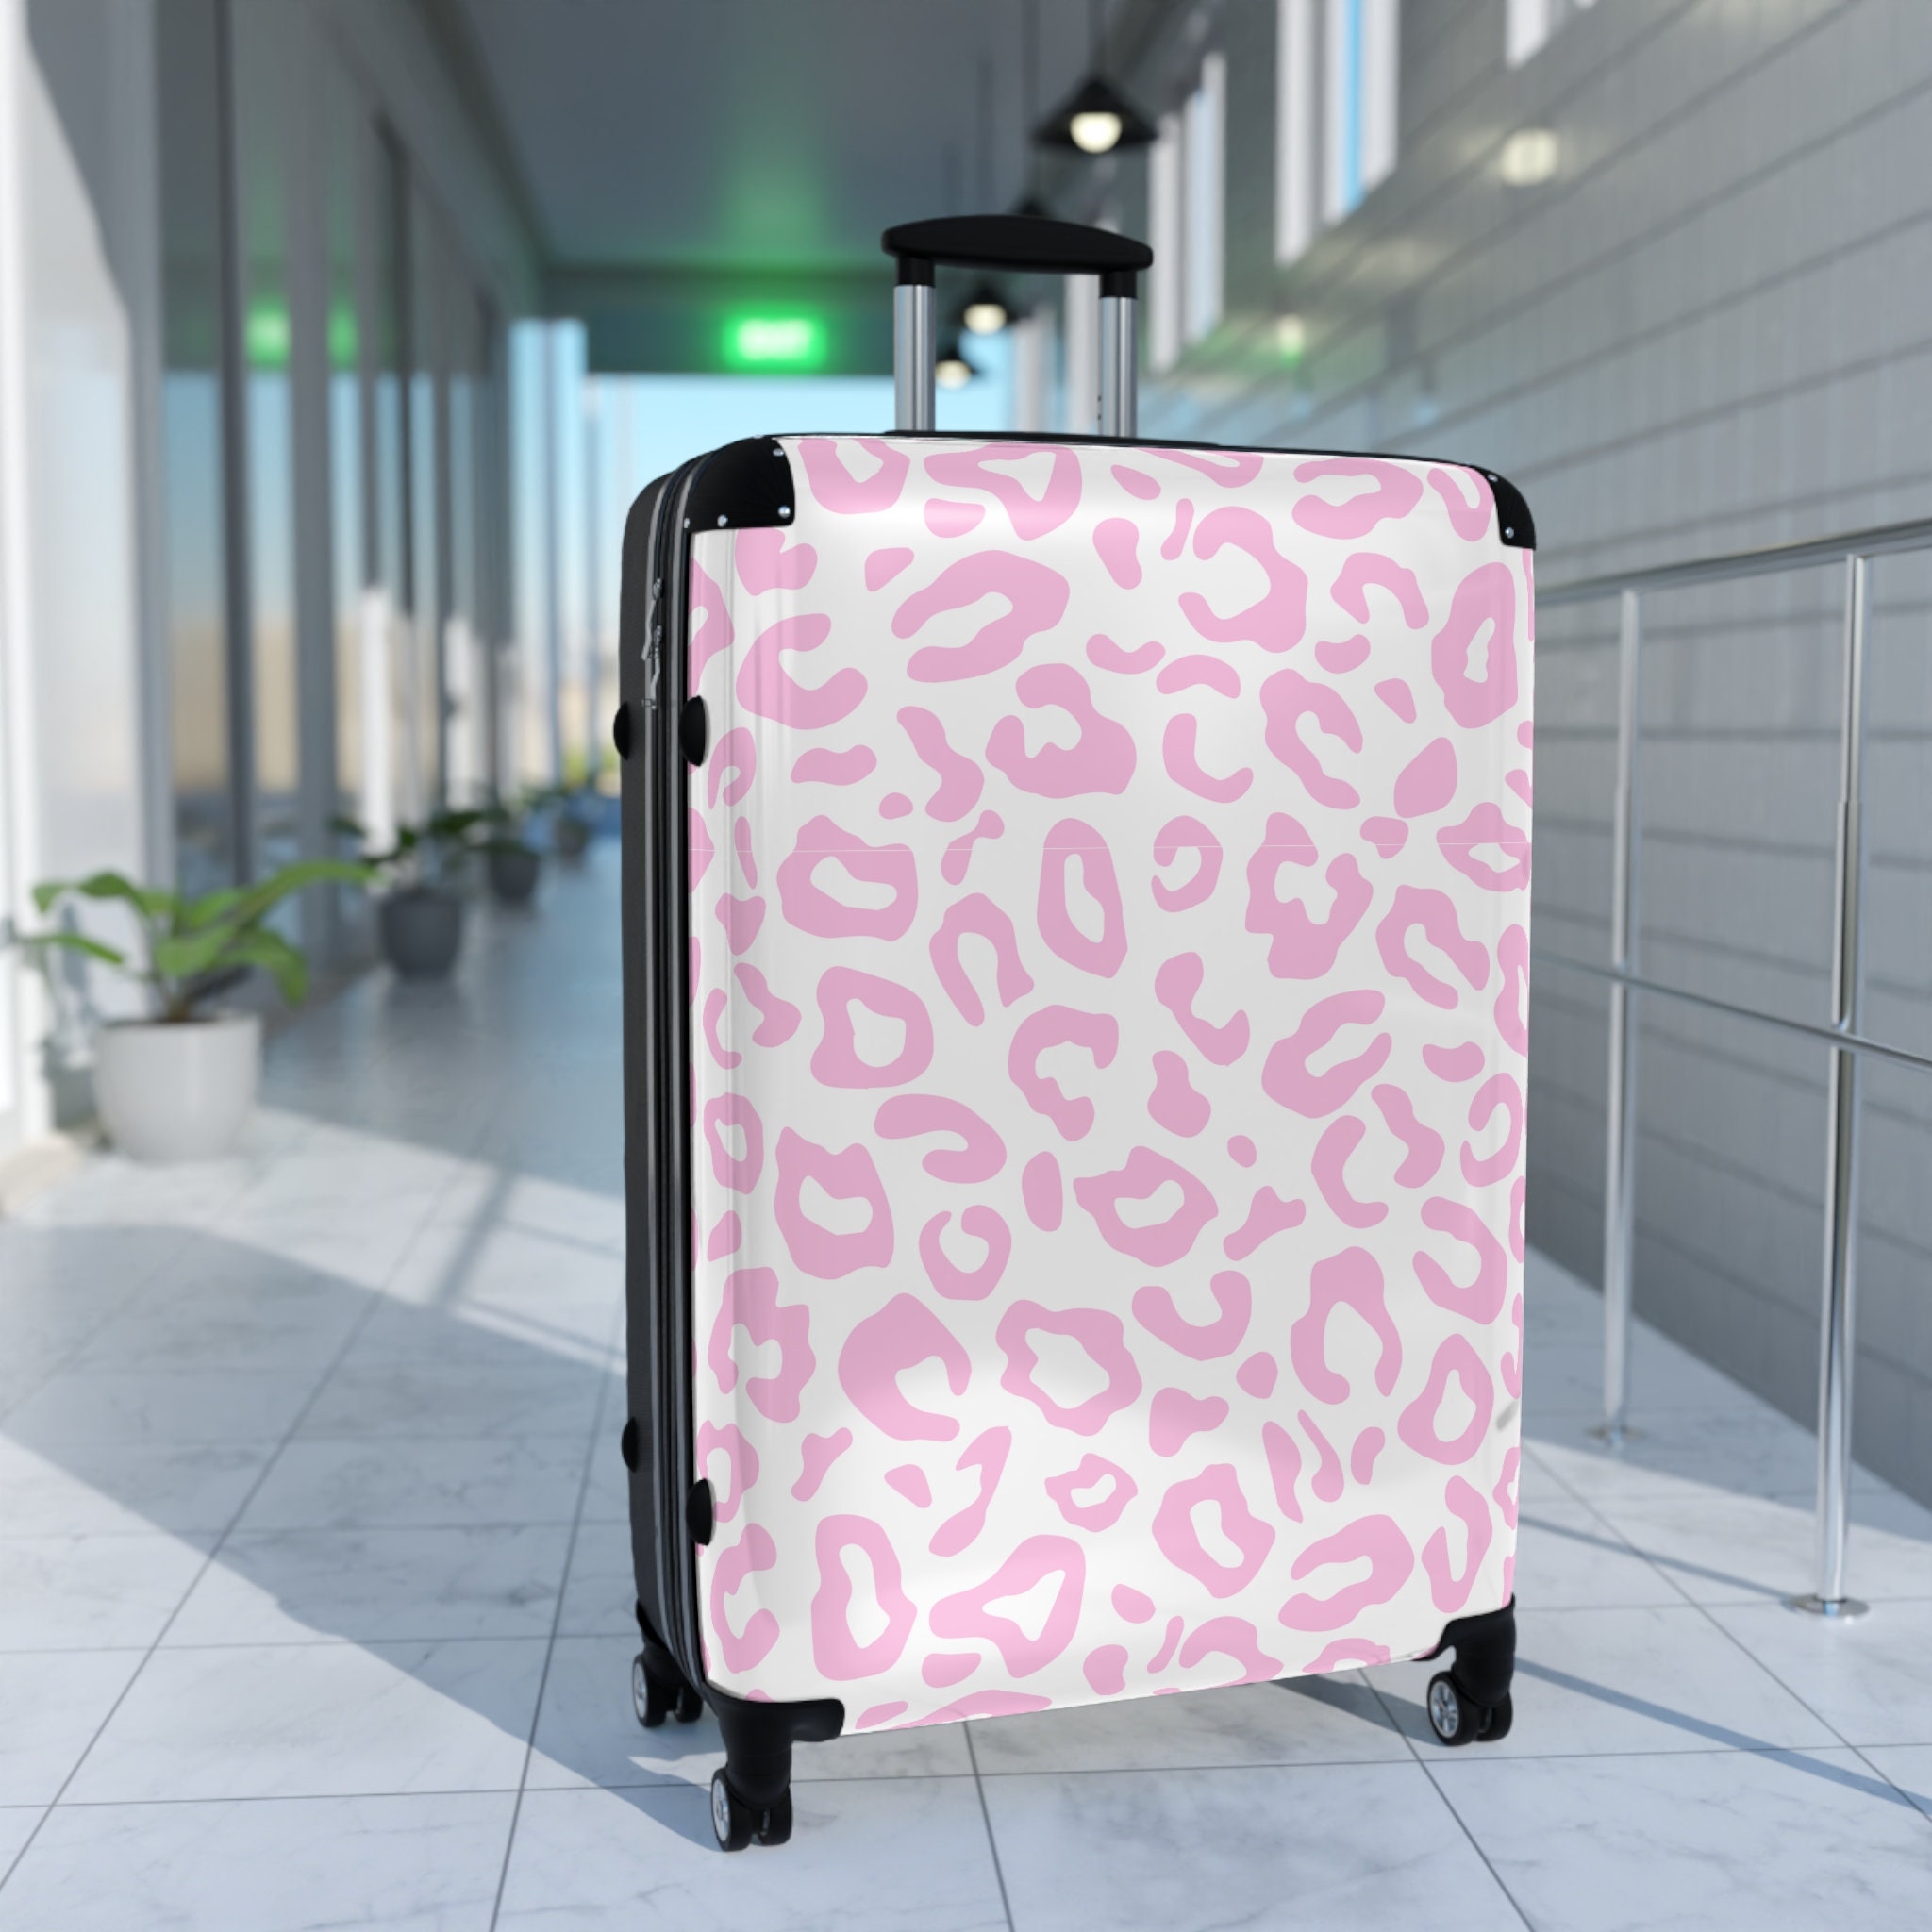 The Personalised Leopard Print Suitcase - Pink Edition – NIEVUS